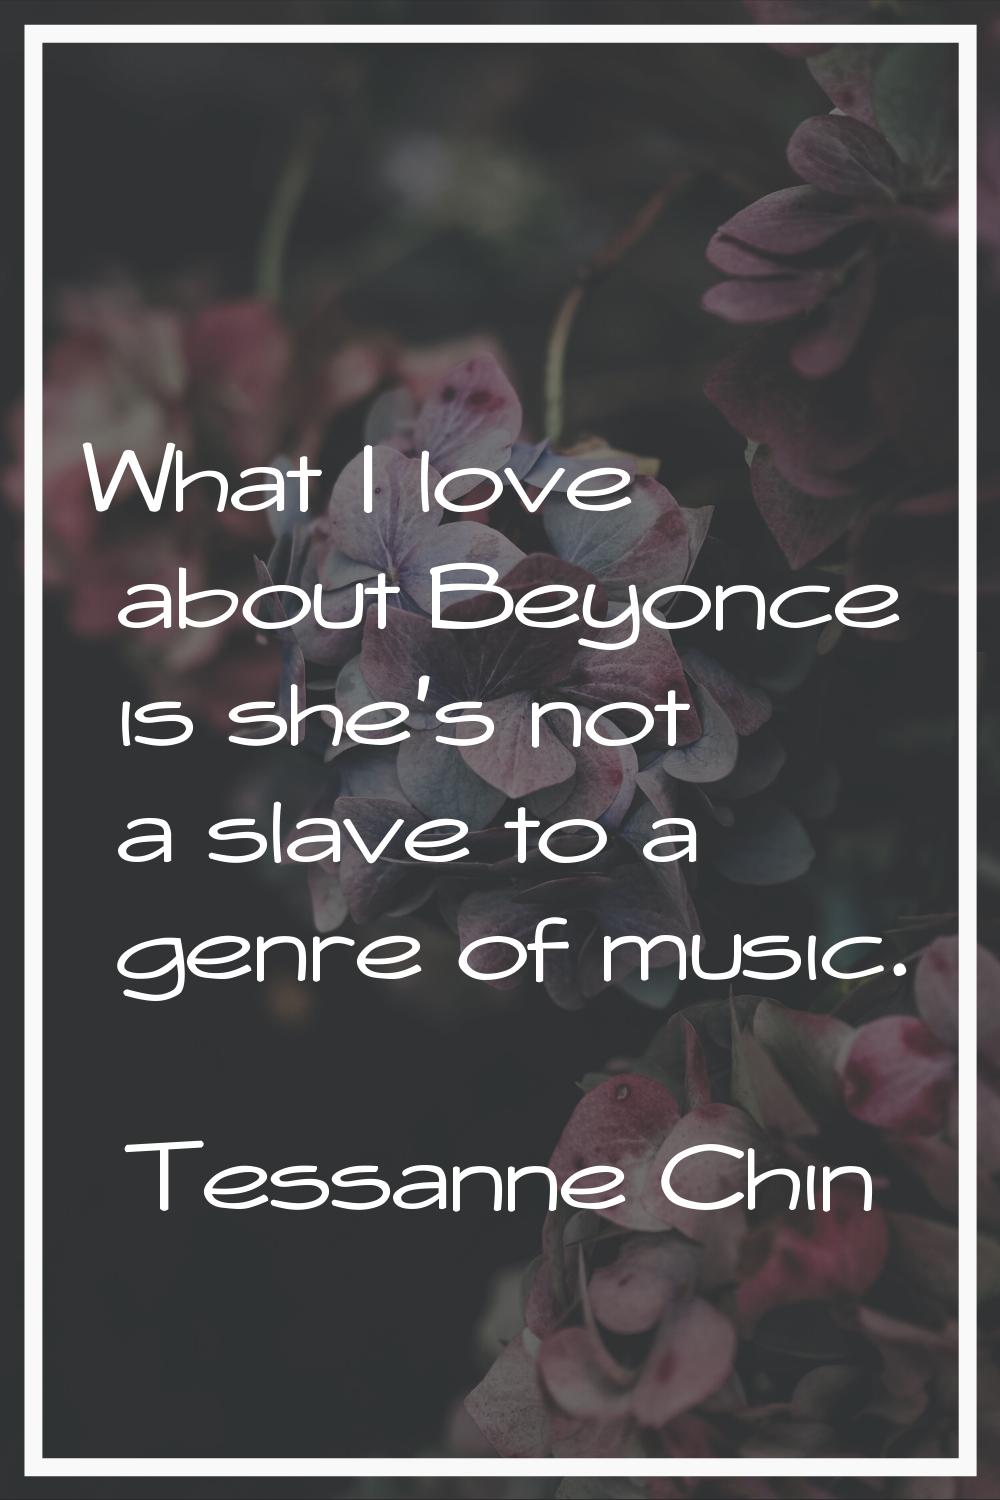 What I love about Beyonce is she's not a slave to a genre of music.